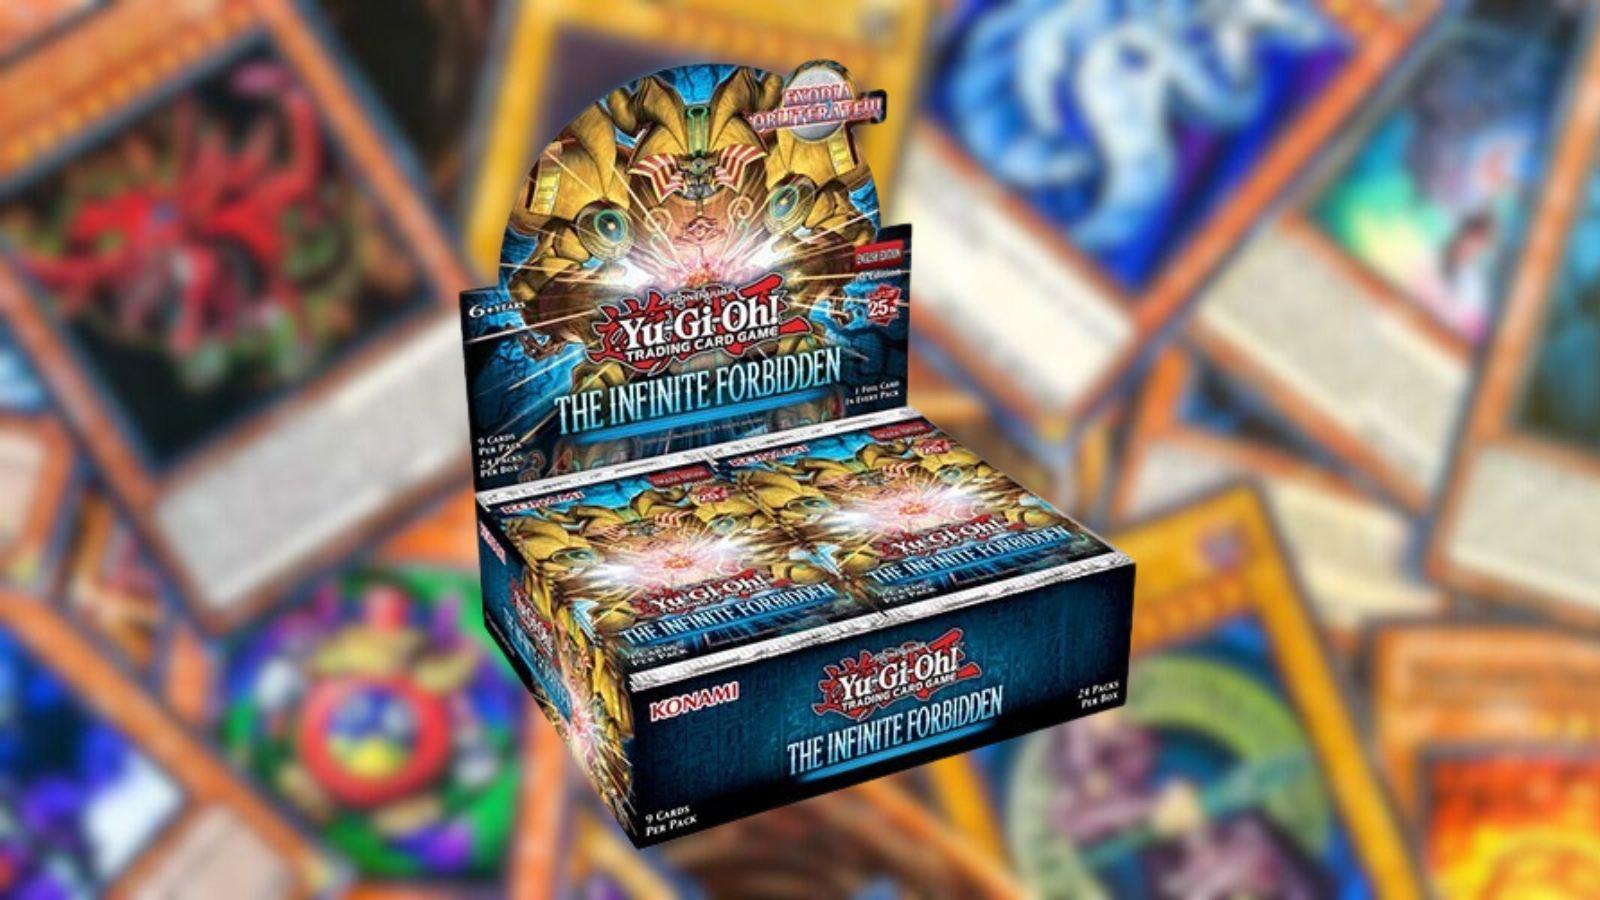 The Infinite Forbidden booster set from Yu-Gi-Oh!